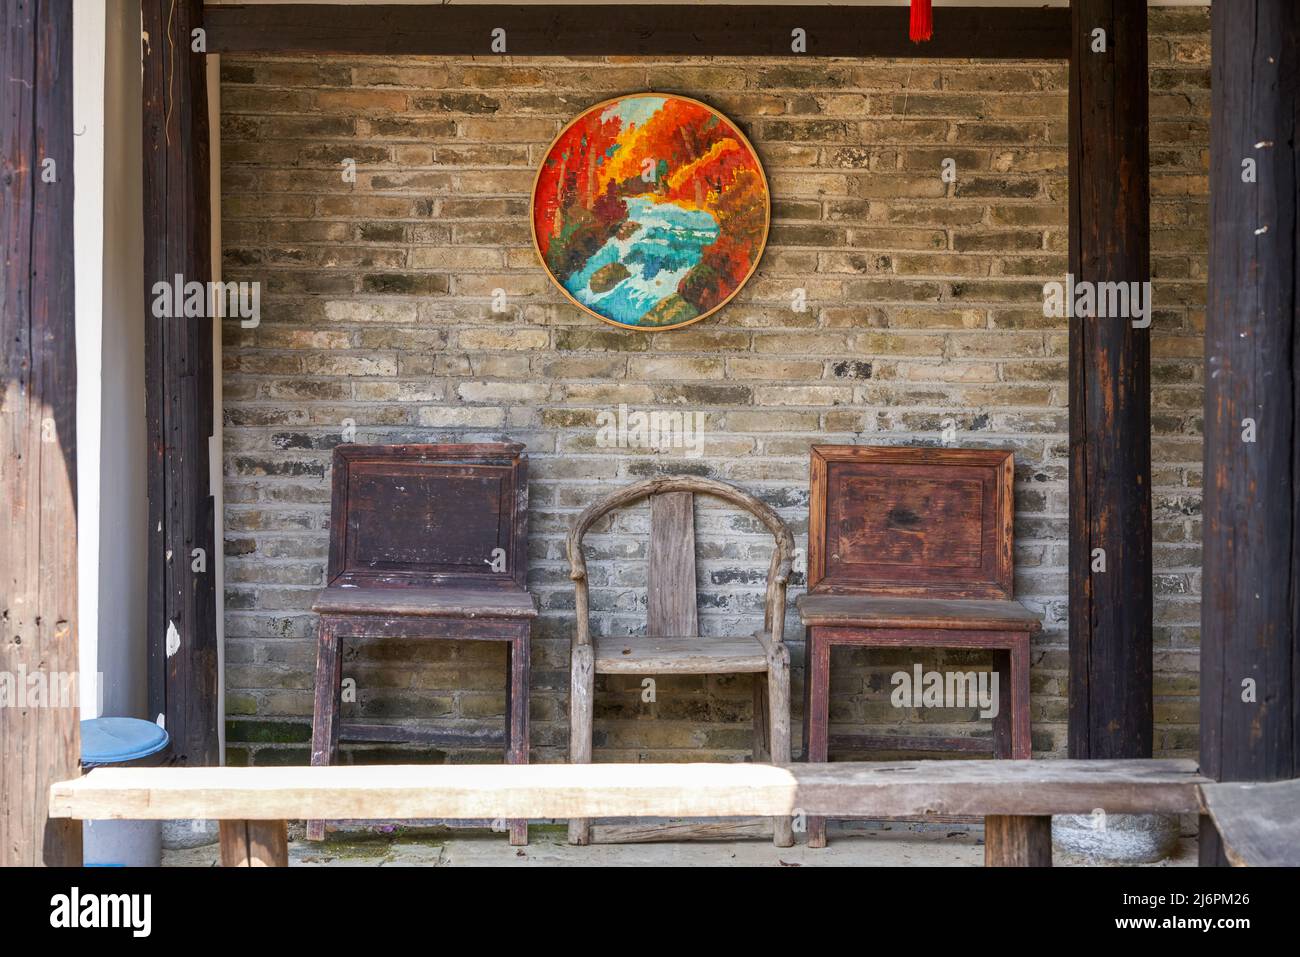 Seat furniture in the interior of ancient Chinese buildings Stock Photo